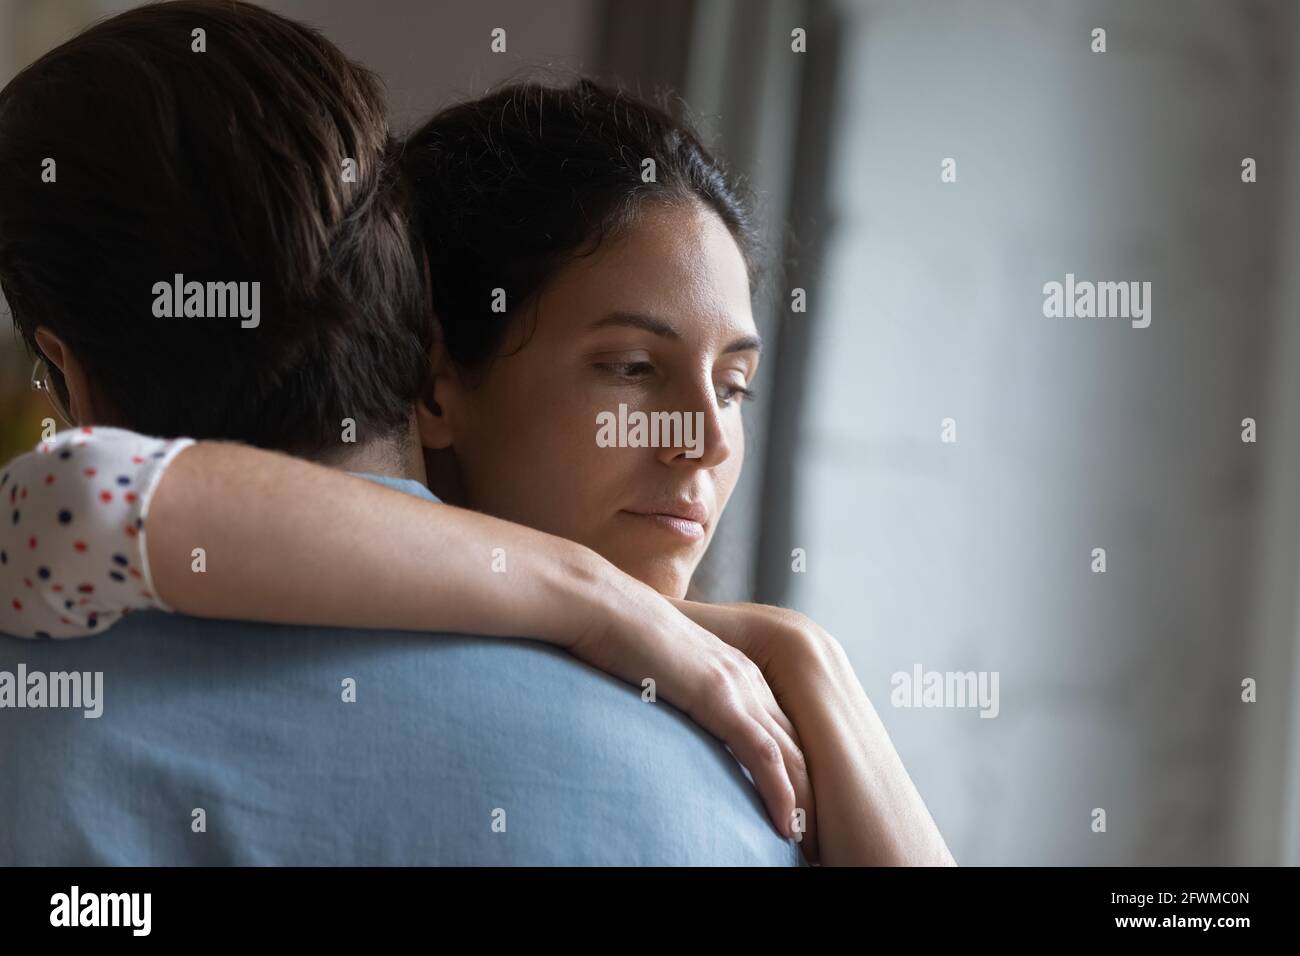 Unhappy thoughtful young woman cuddling husband, feeling stressed after conflict, Stock Photo